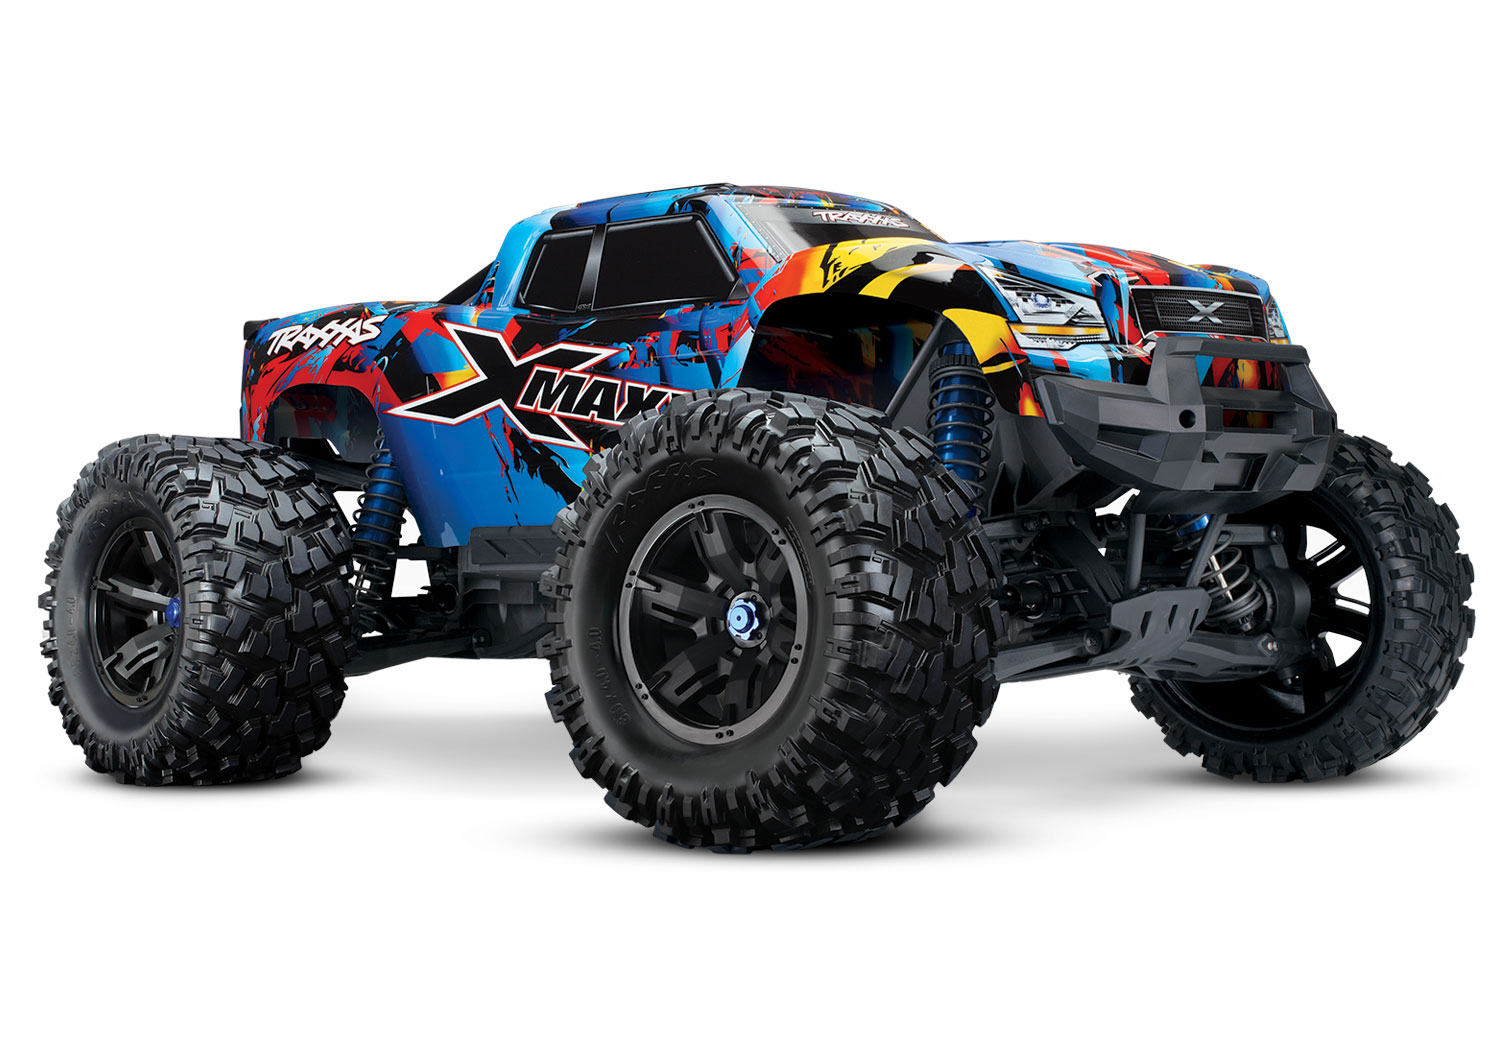 traxxas-77086-4-RnR-1-X-MAXX-4wd-8s-Brushless-Pick-Up-Truck-the-evolution-of-tough-Monstermachine